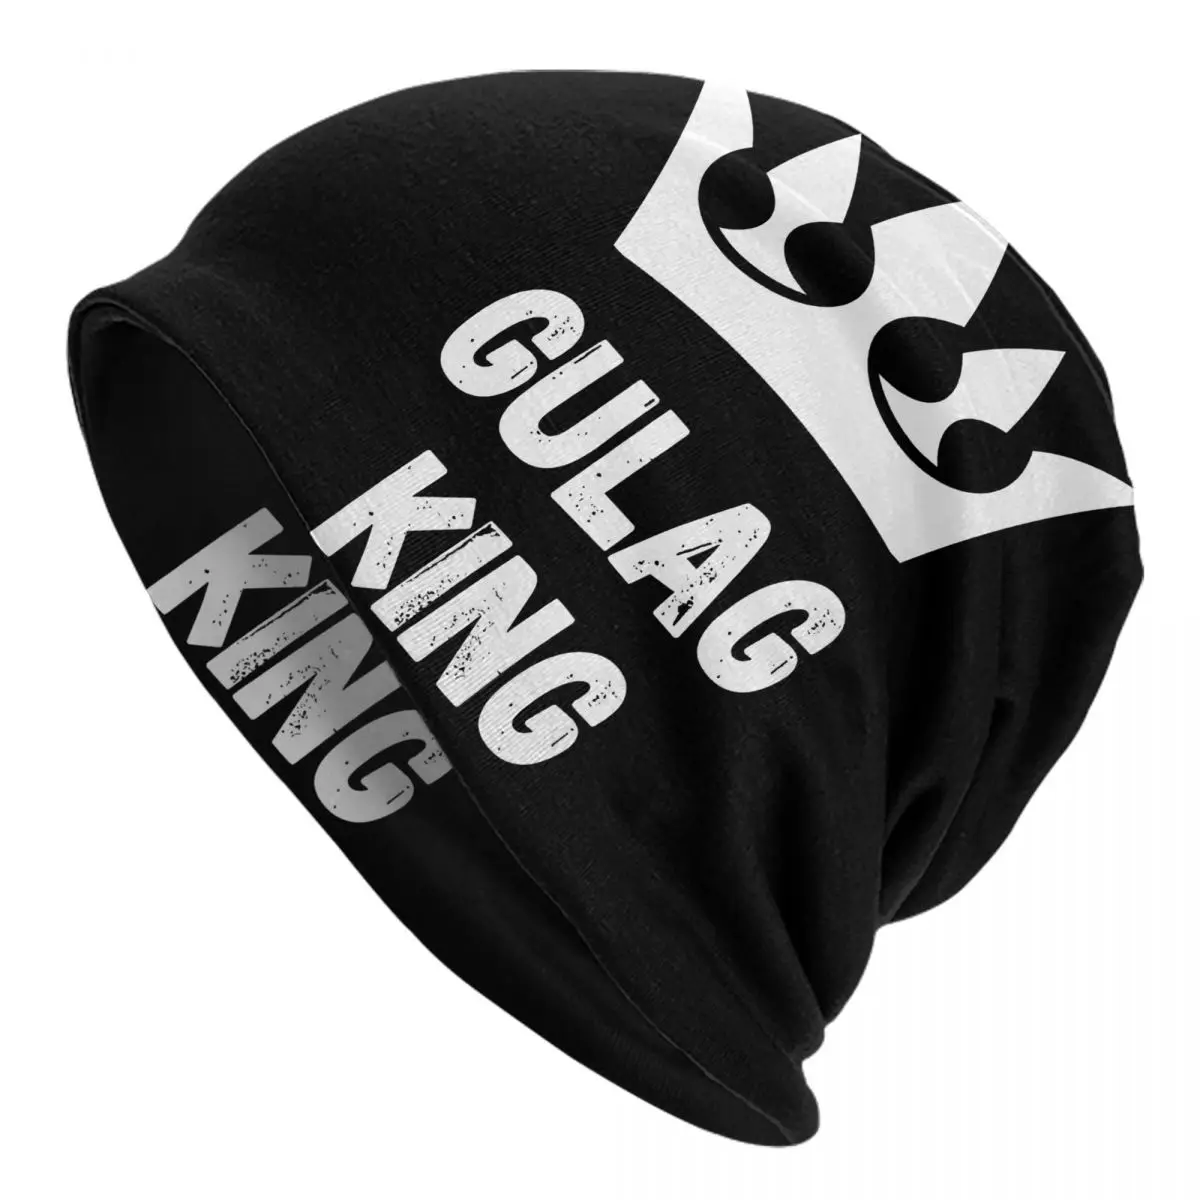 Gulag King Adult Men's Women's Knit Hat Keep warm winter Funny knitted hat